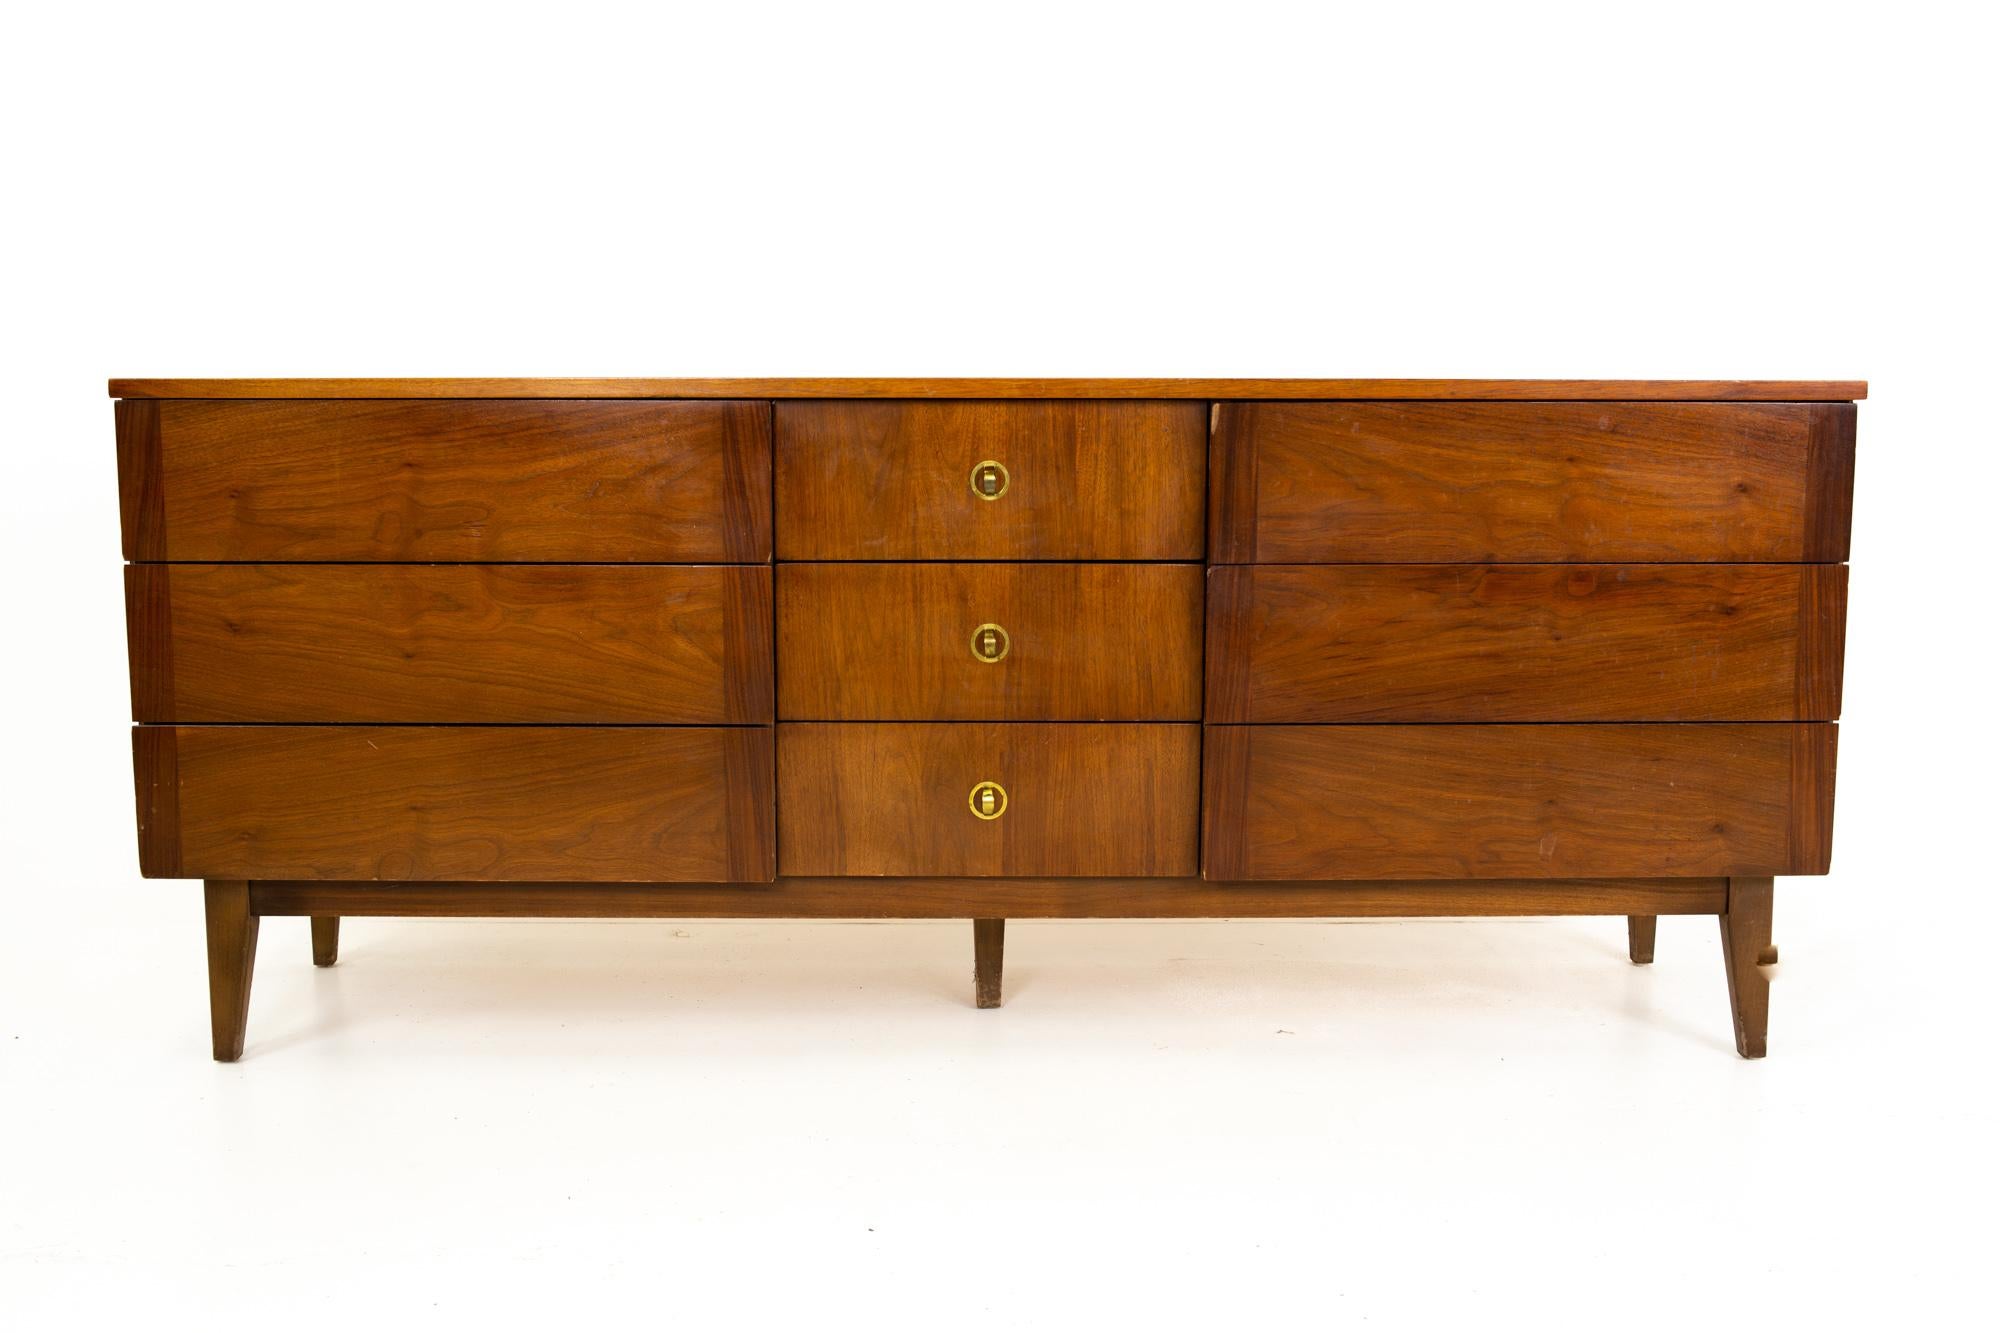 Stanley Mid Century walnut and brass 9-drawer lowboy dresser
Dresser measures: 72 wide x 18 deep x 30 inches high

This price includes getting this piece in what we call restored vintage condition. That means the piece is permanently fixed upon